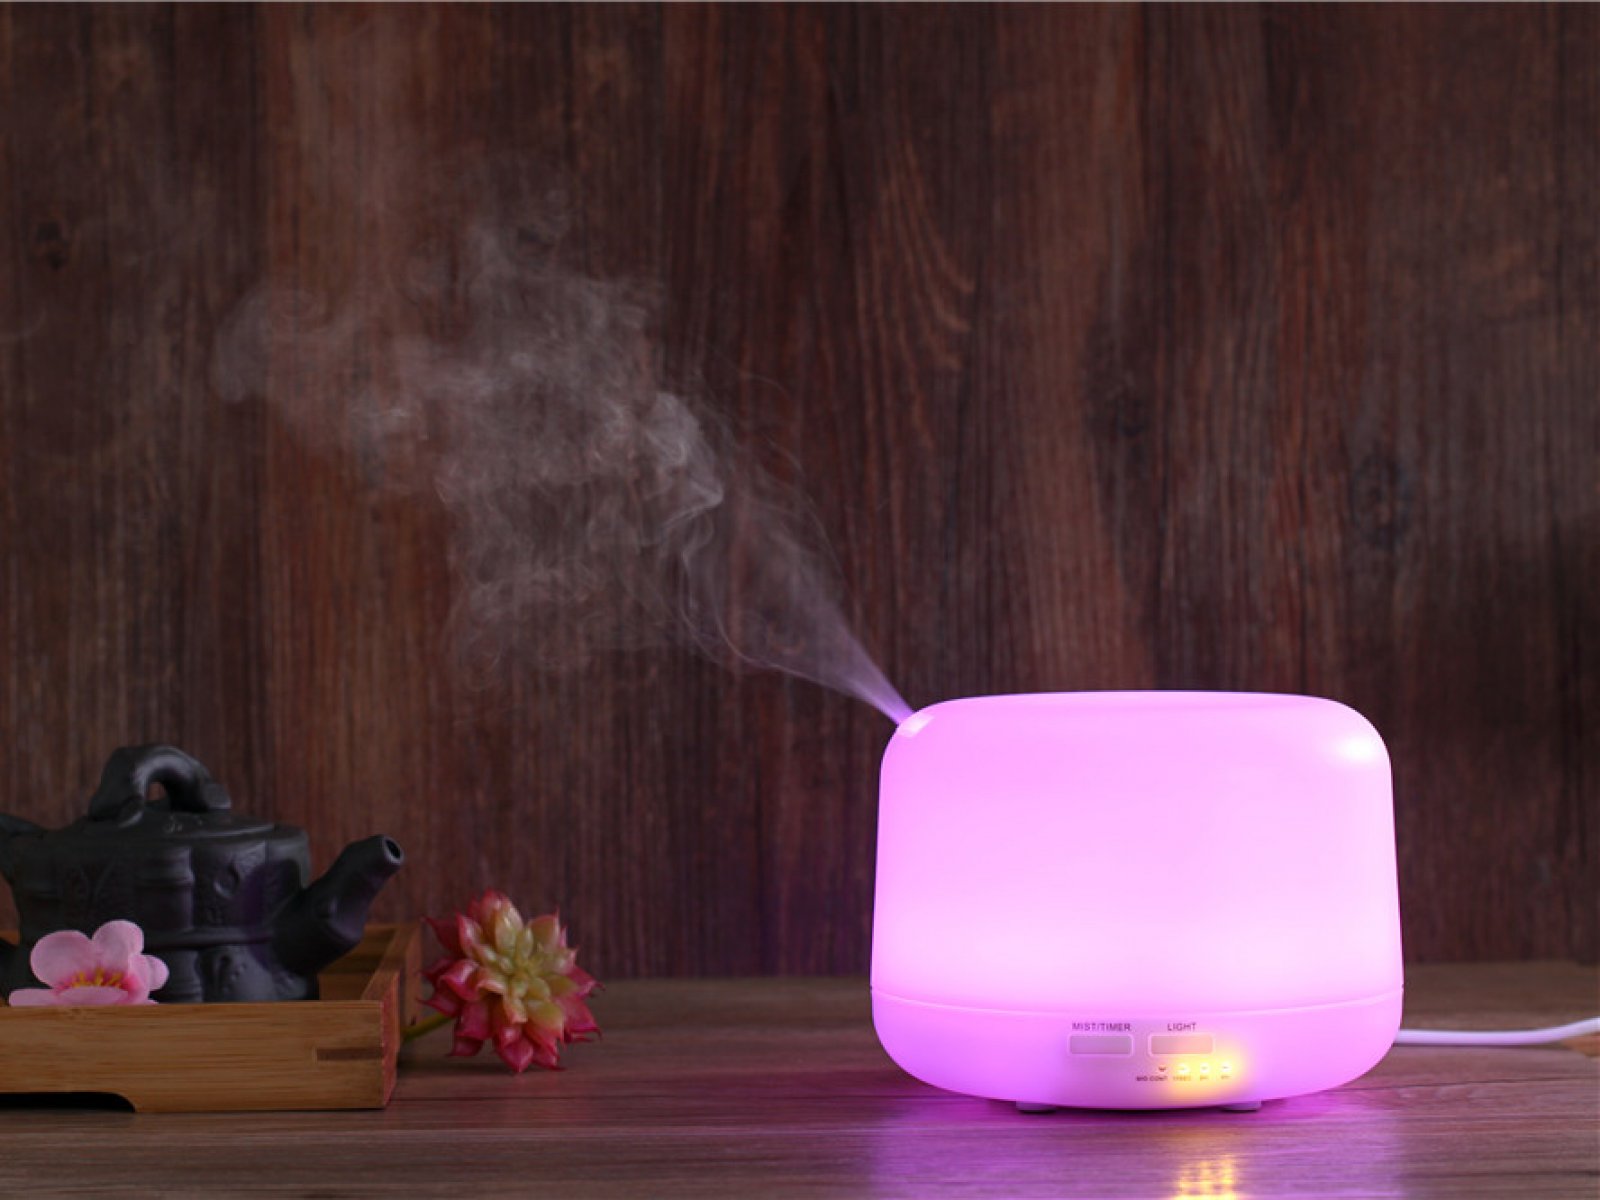 Aroma diffuser FAVORIT + essential oil blend BEWIT 33, 5 ml -  - 8